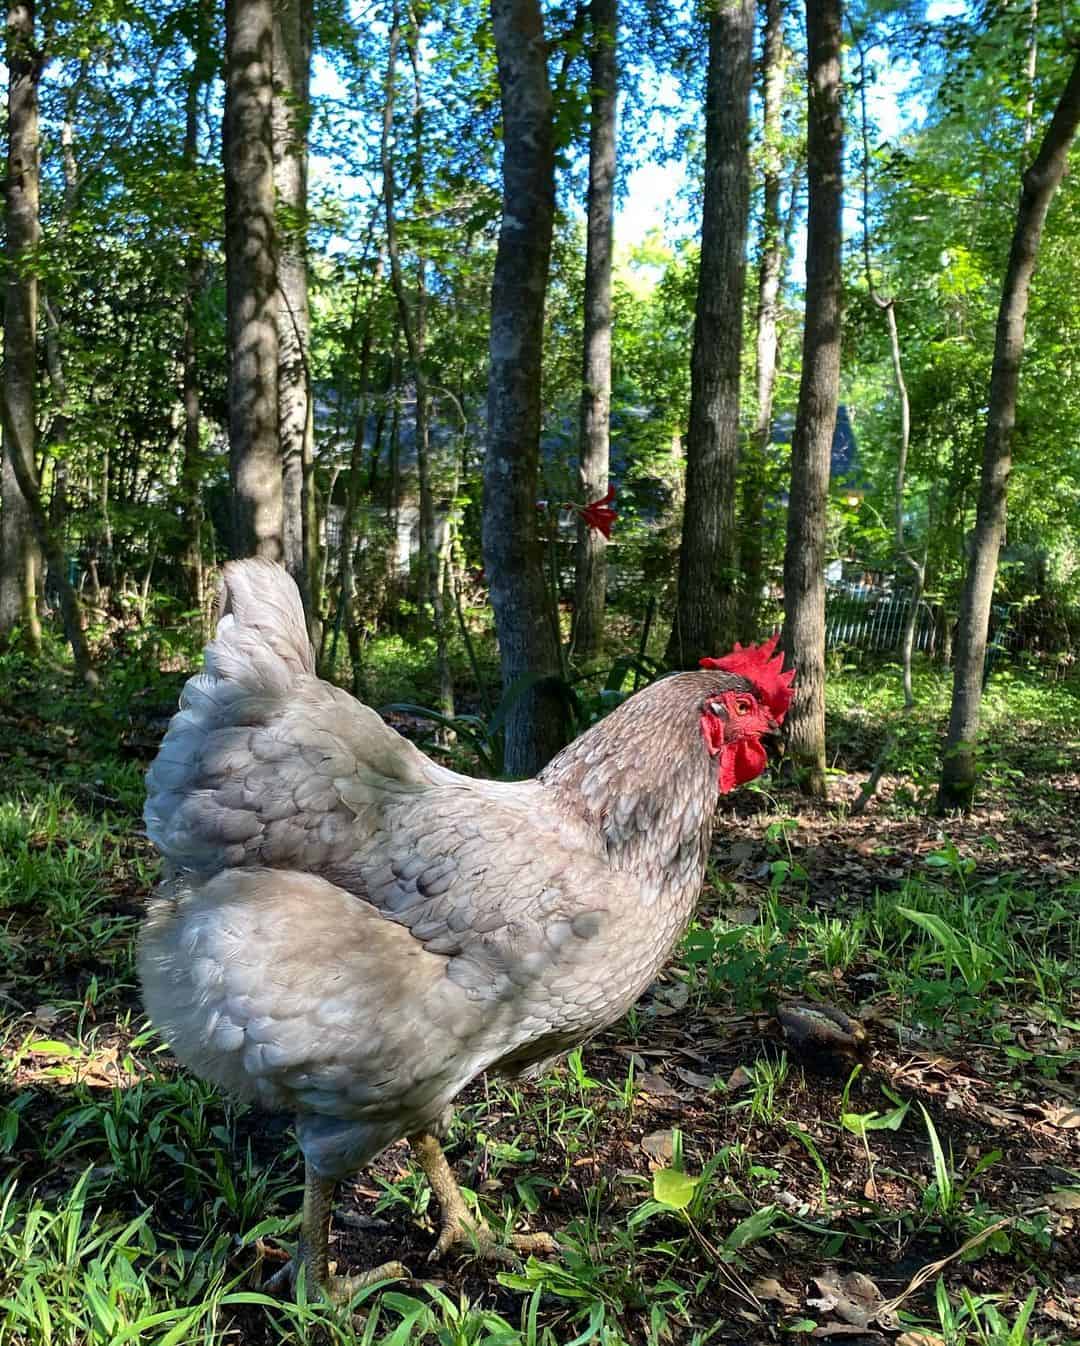 What Are Hybrid Chickens?